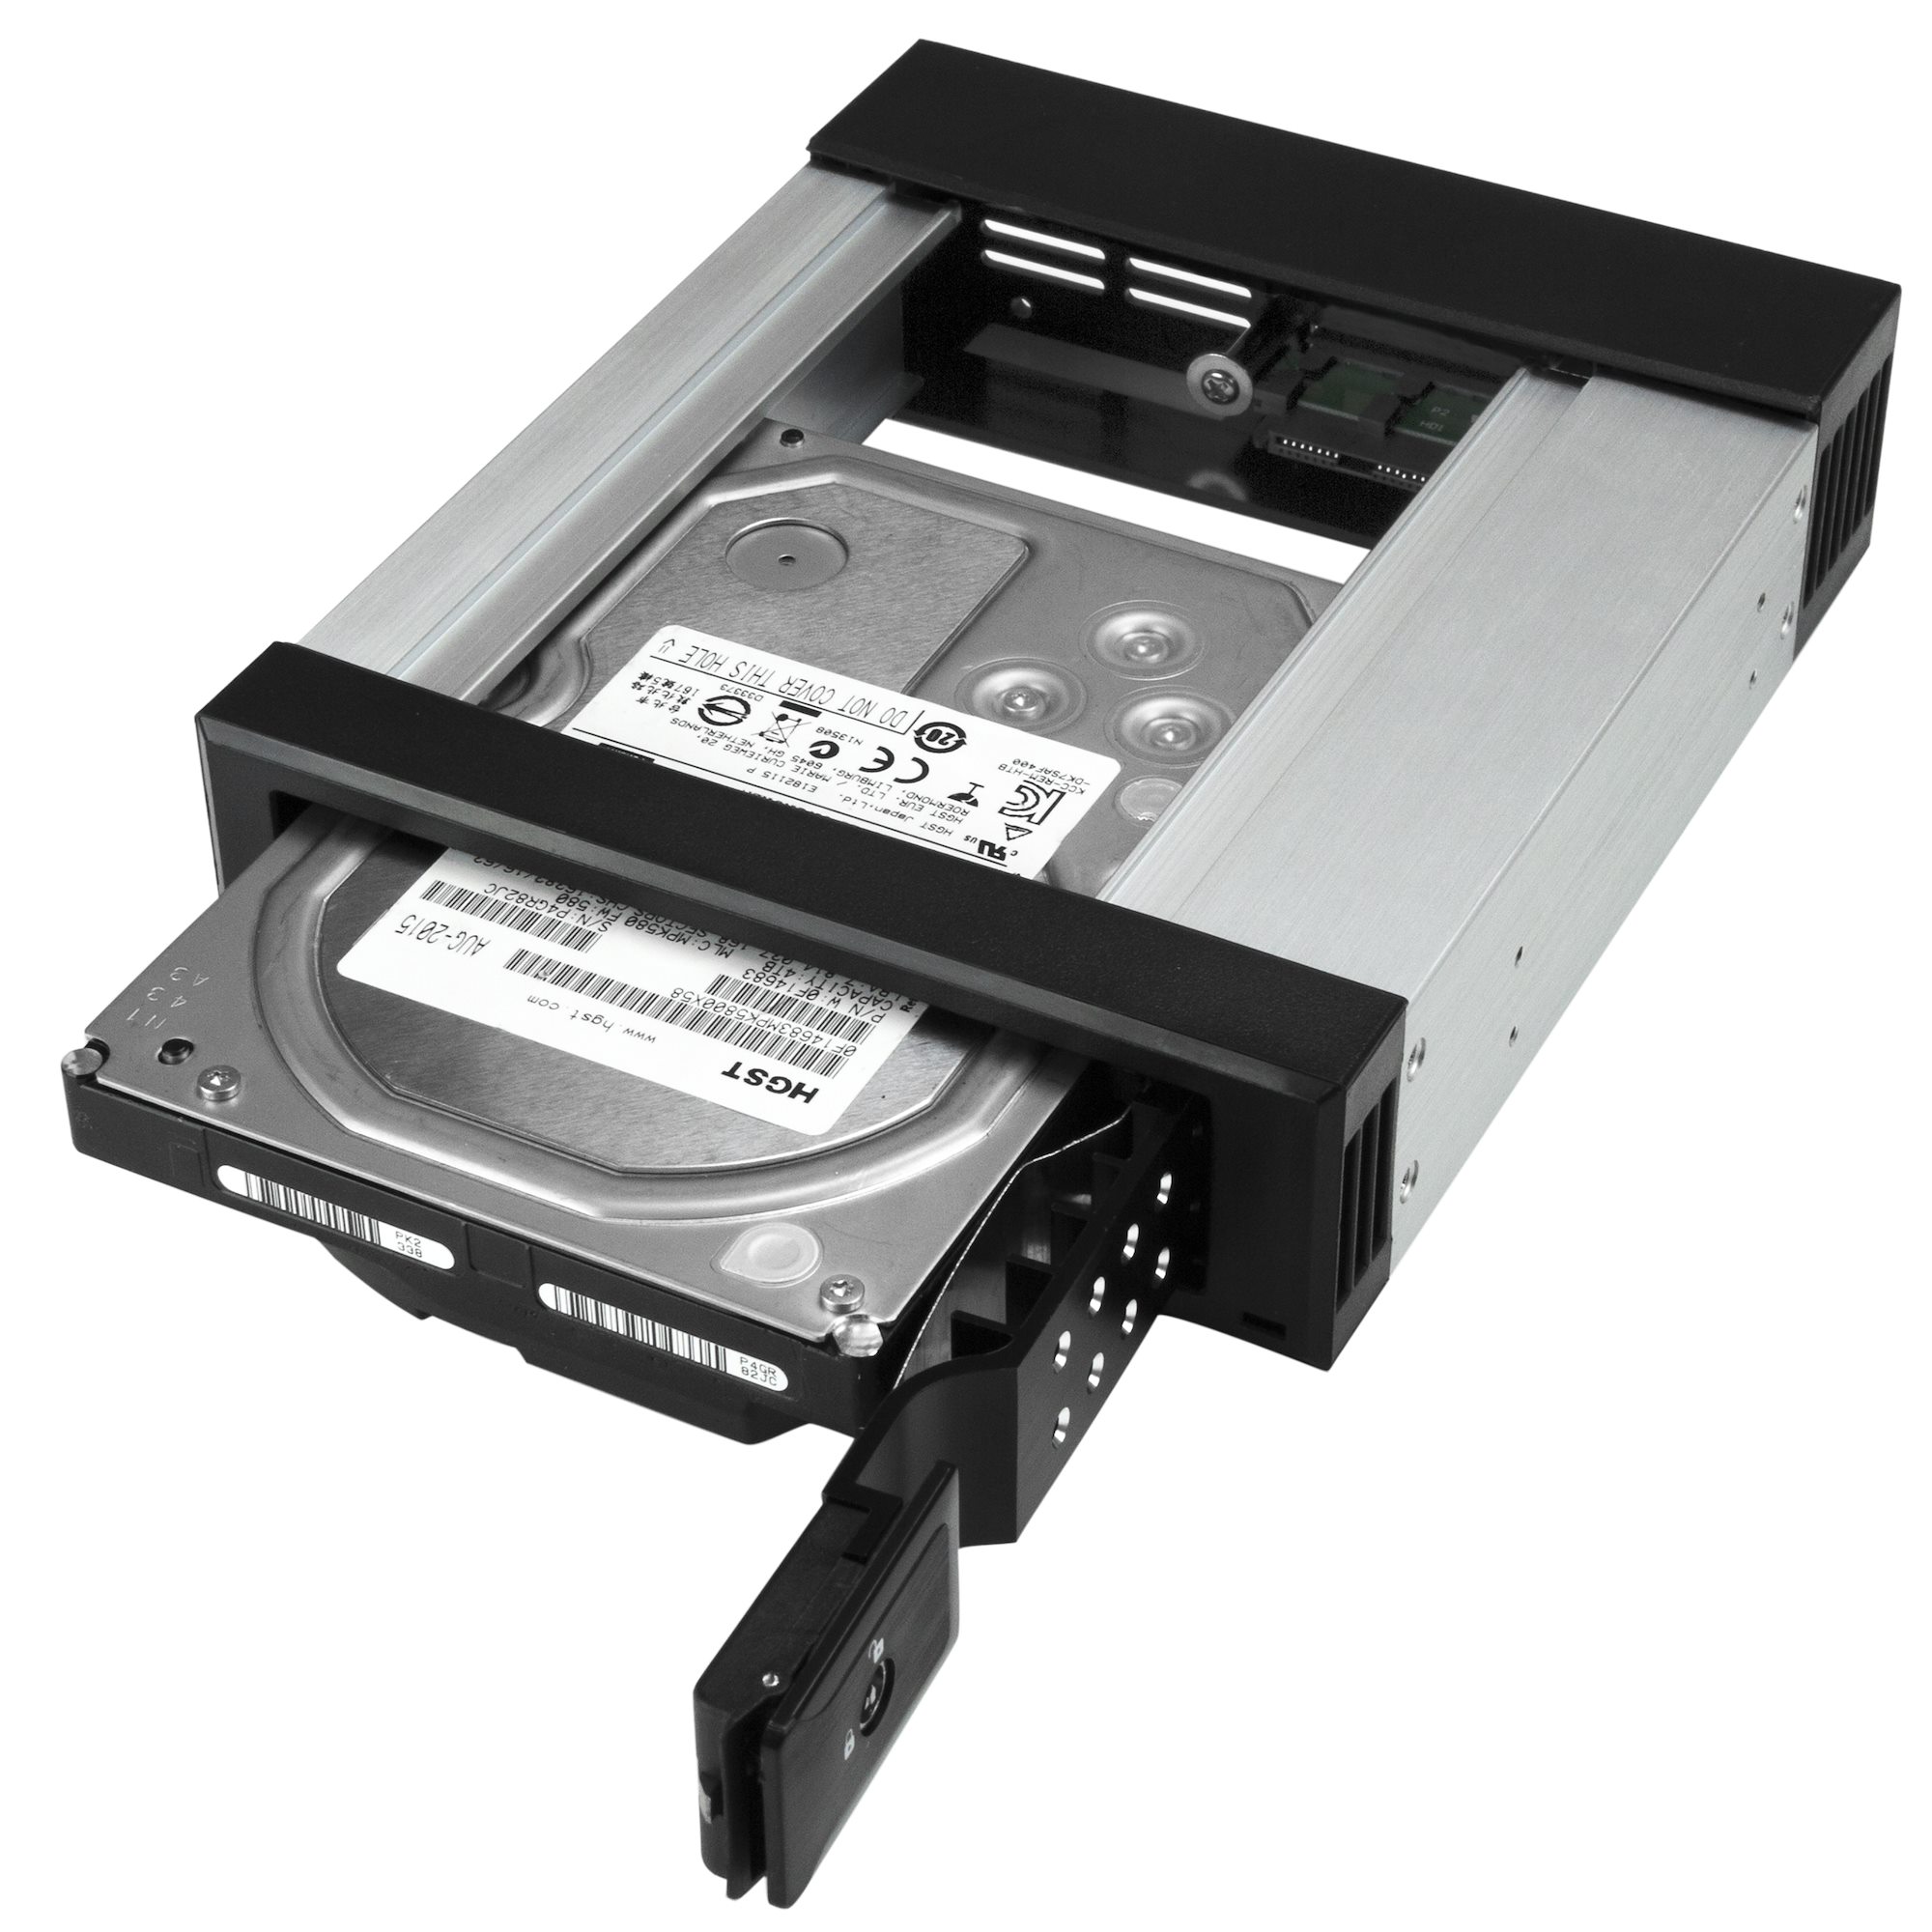 5.25 to 3.5 Hard Drive Hot Swap Bay - For 3.5